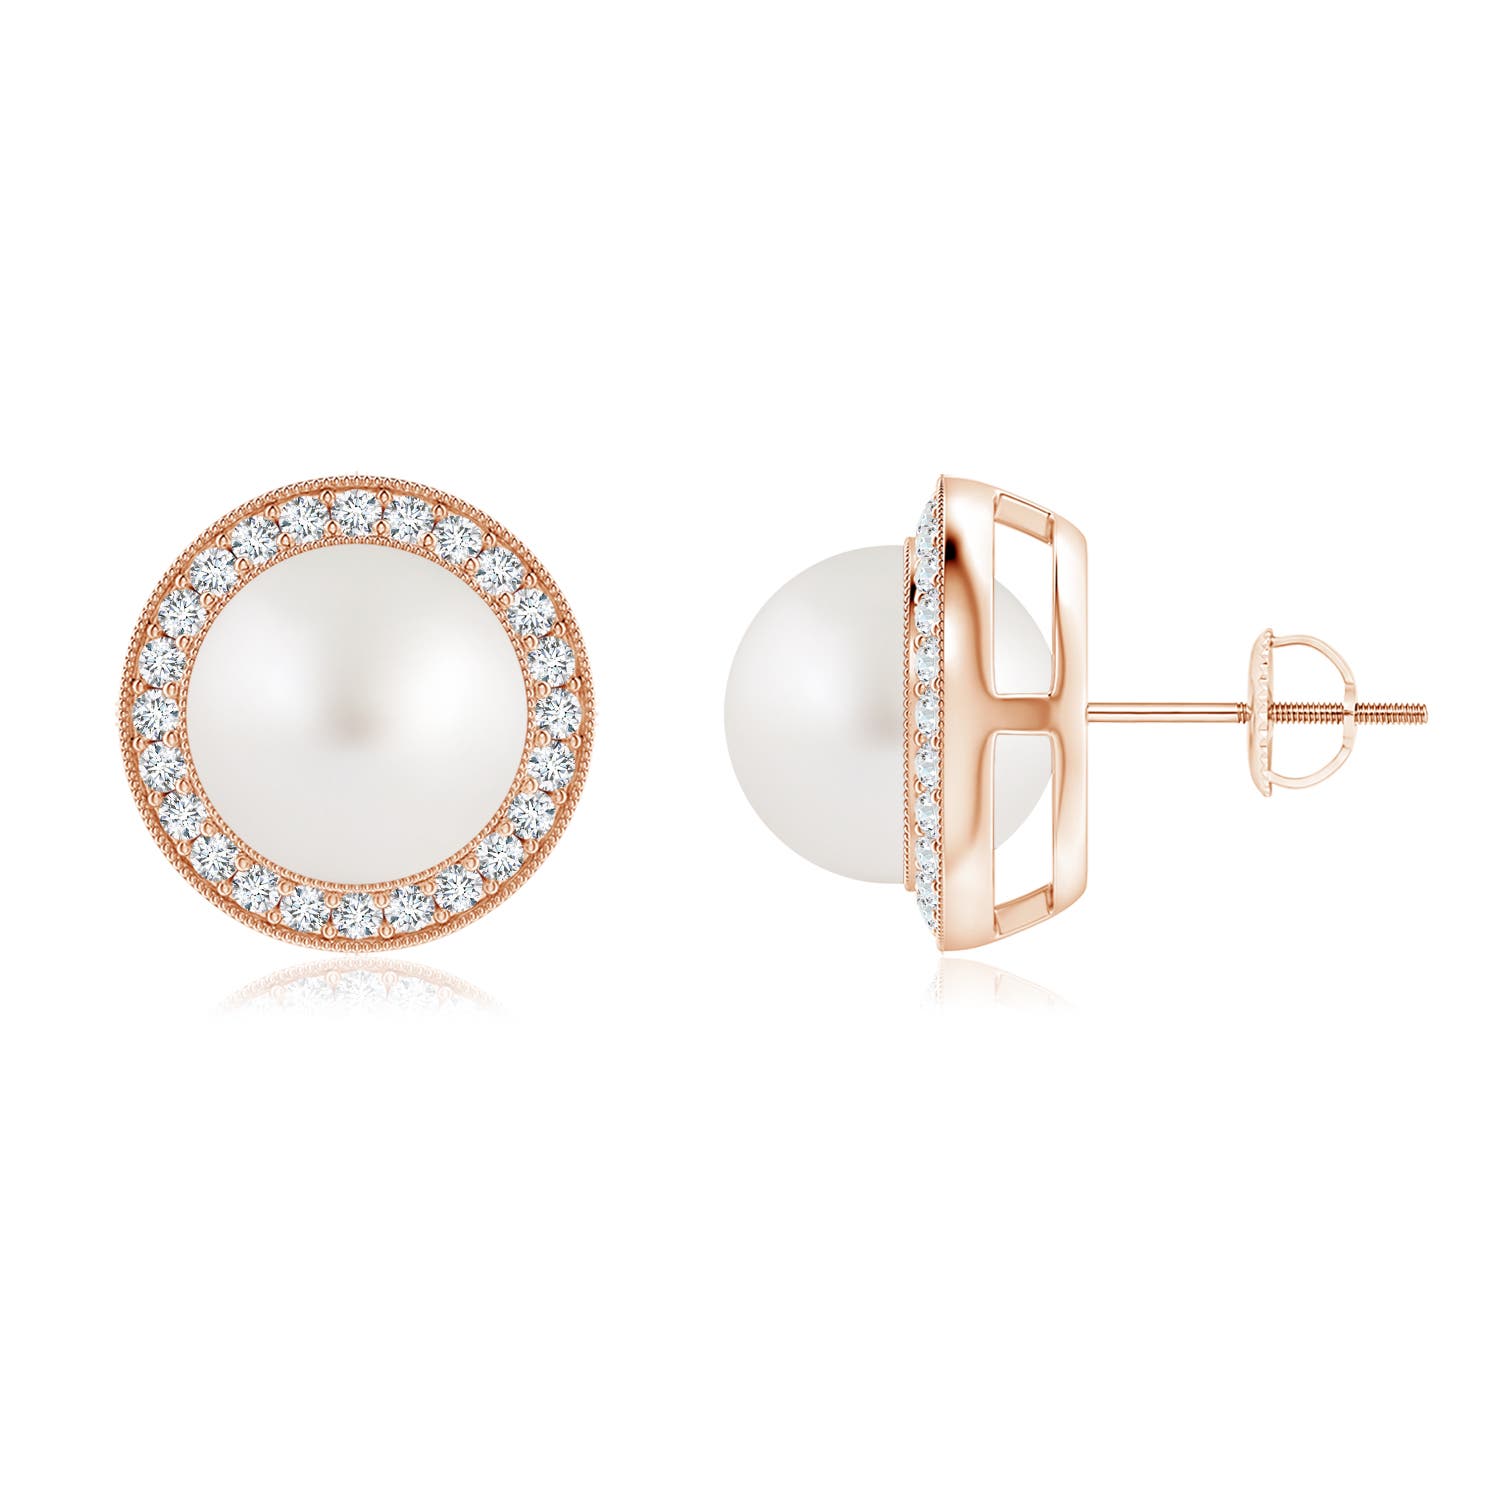 AA - South Sea Cultured Pearl / 11.03 CT / 14 KT Rose Gold